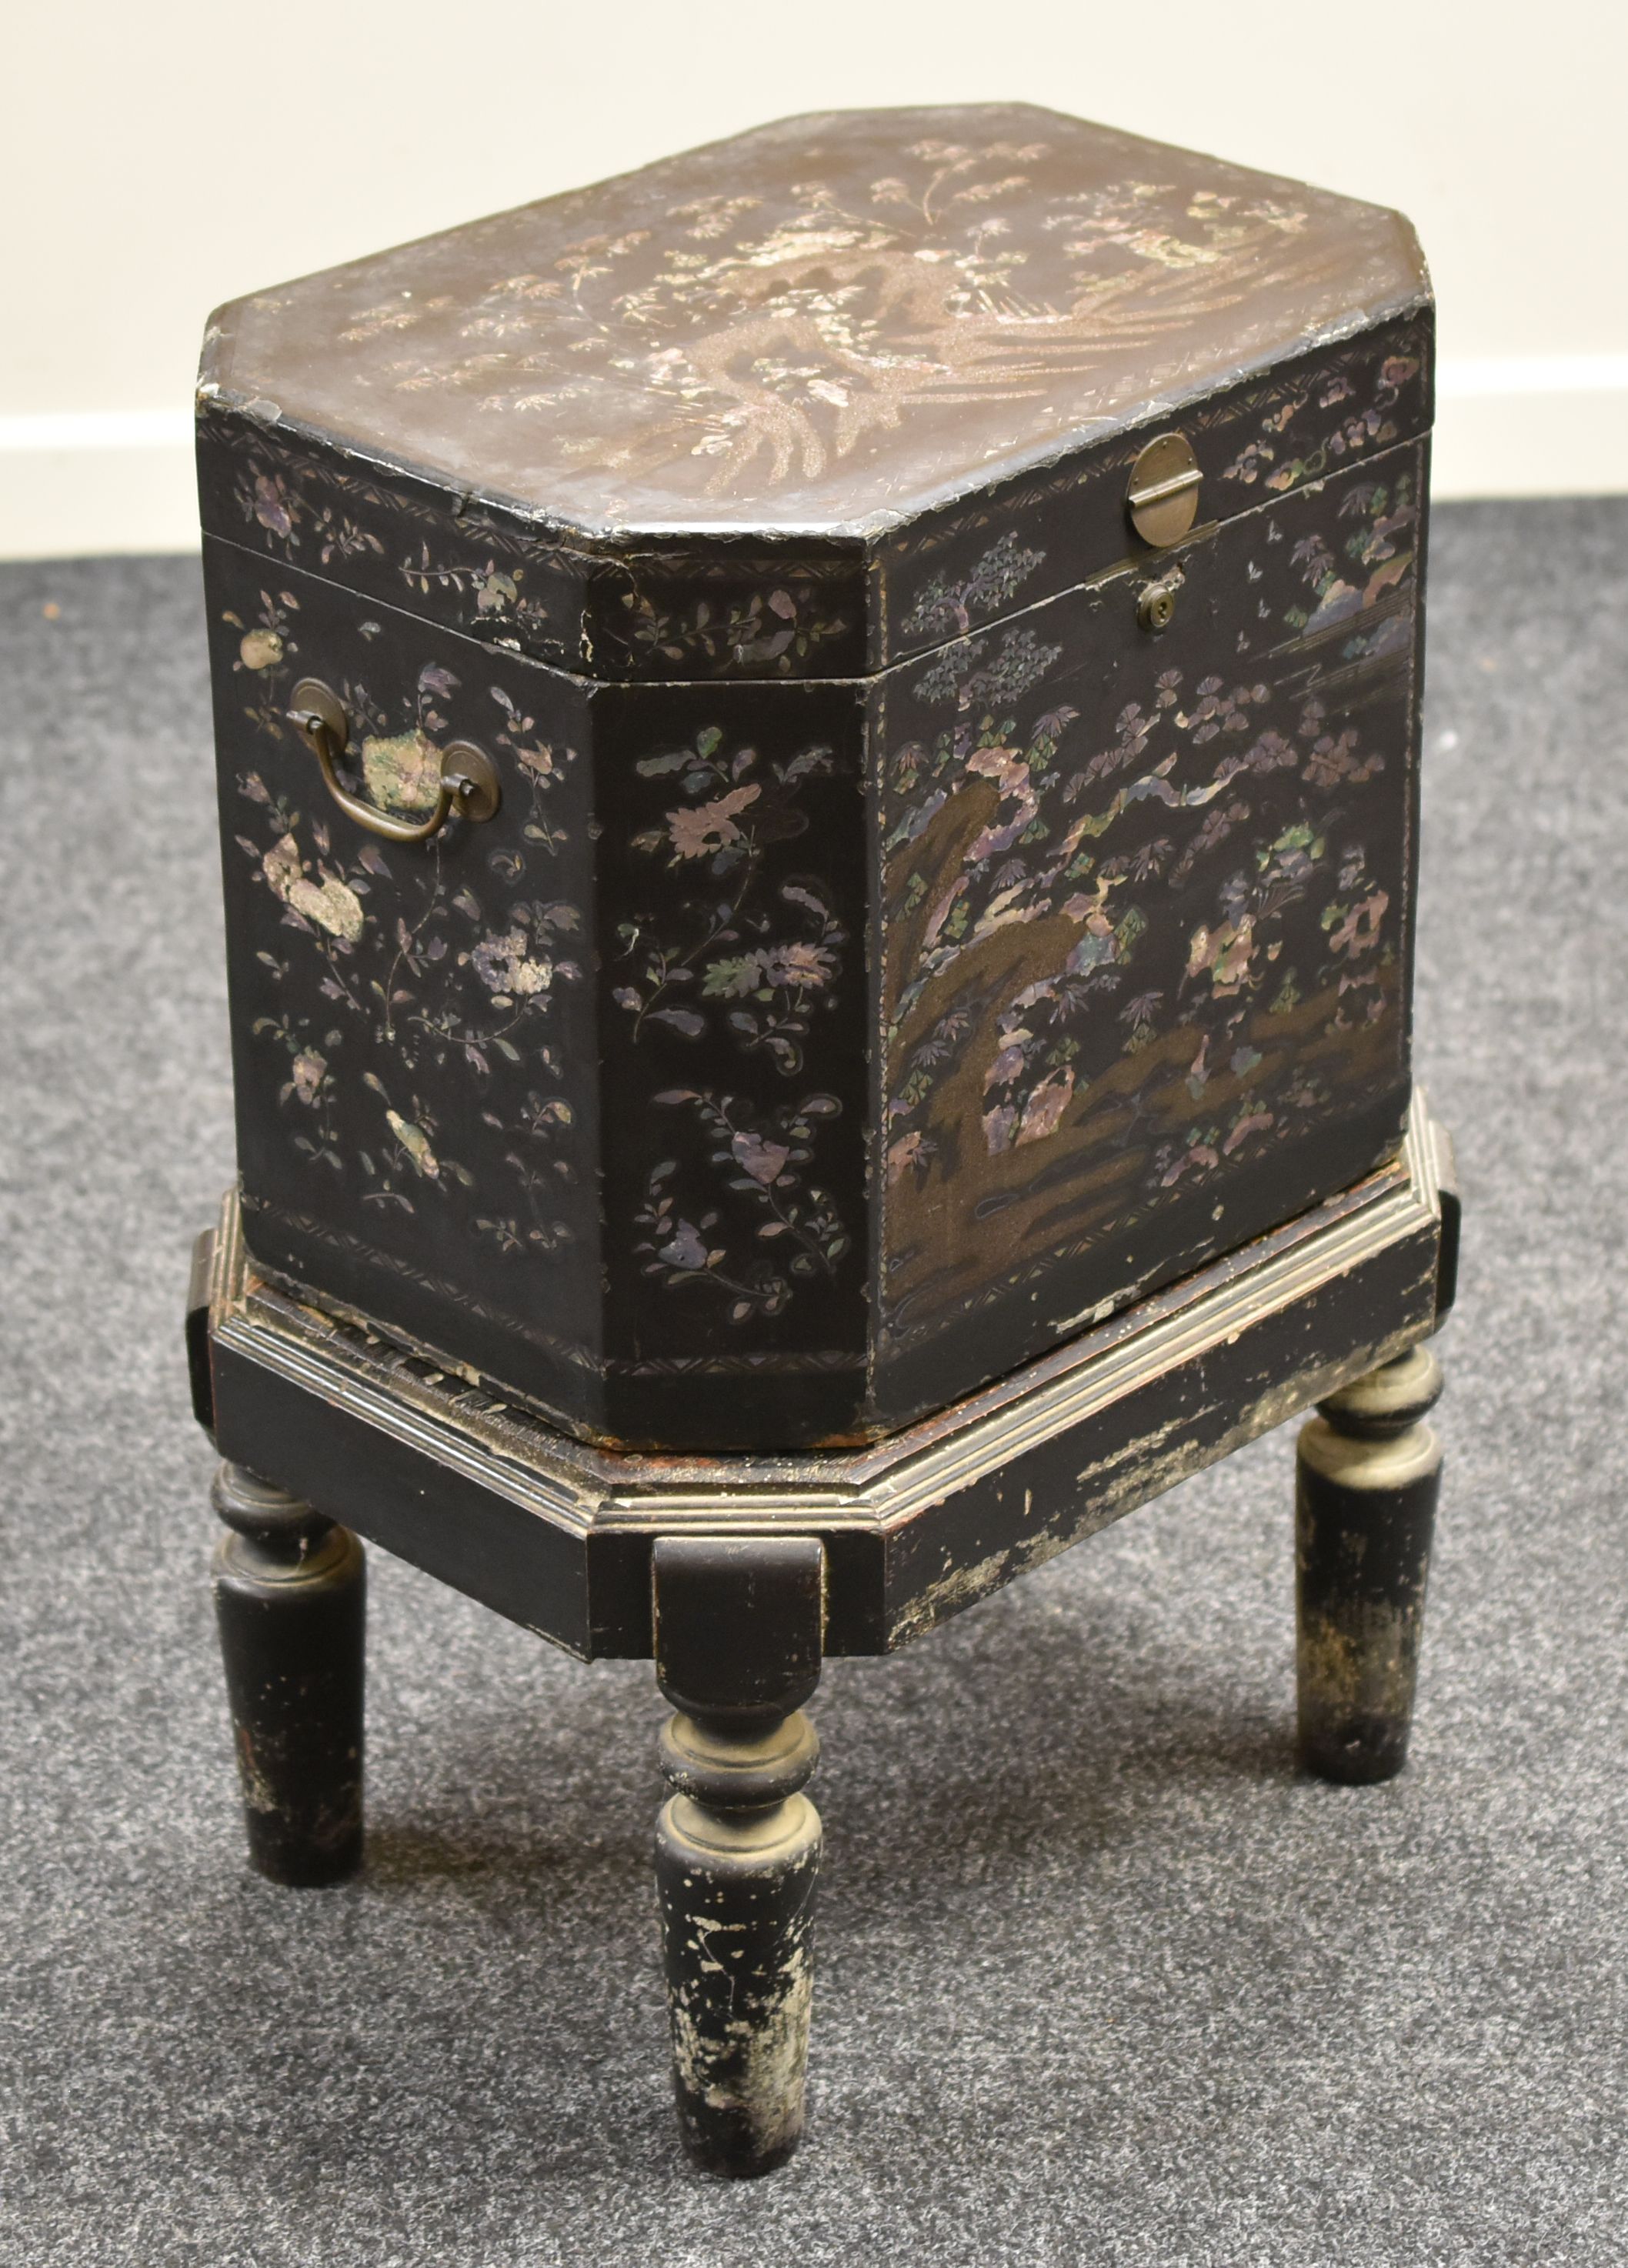 A MOTHER OF PEARL INLAID LACQUER-WARE STORAGE TABLE circa 1880-1900 Provenance: great-great uncle - Image 4 of 5